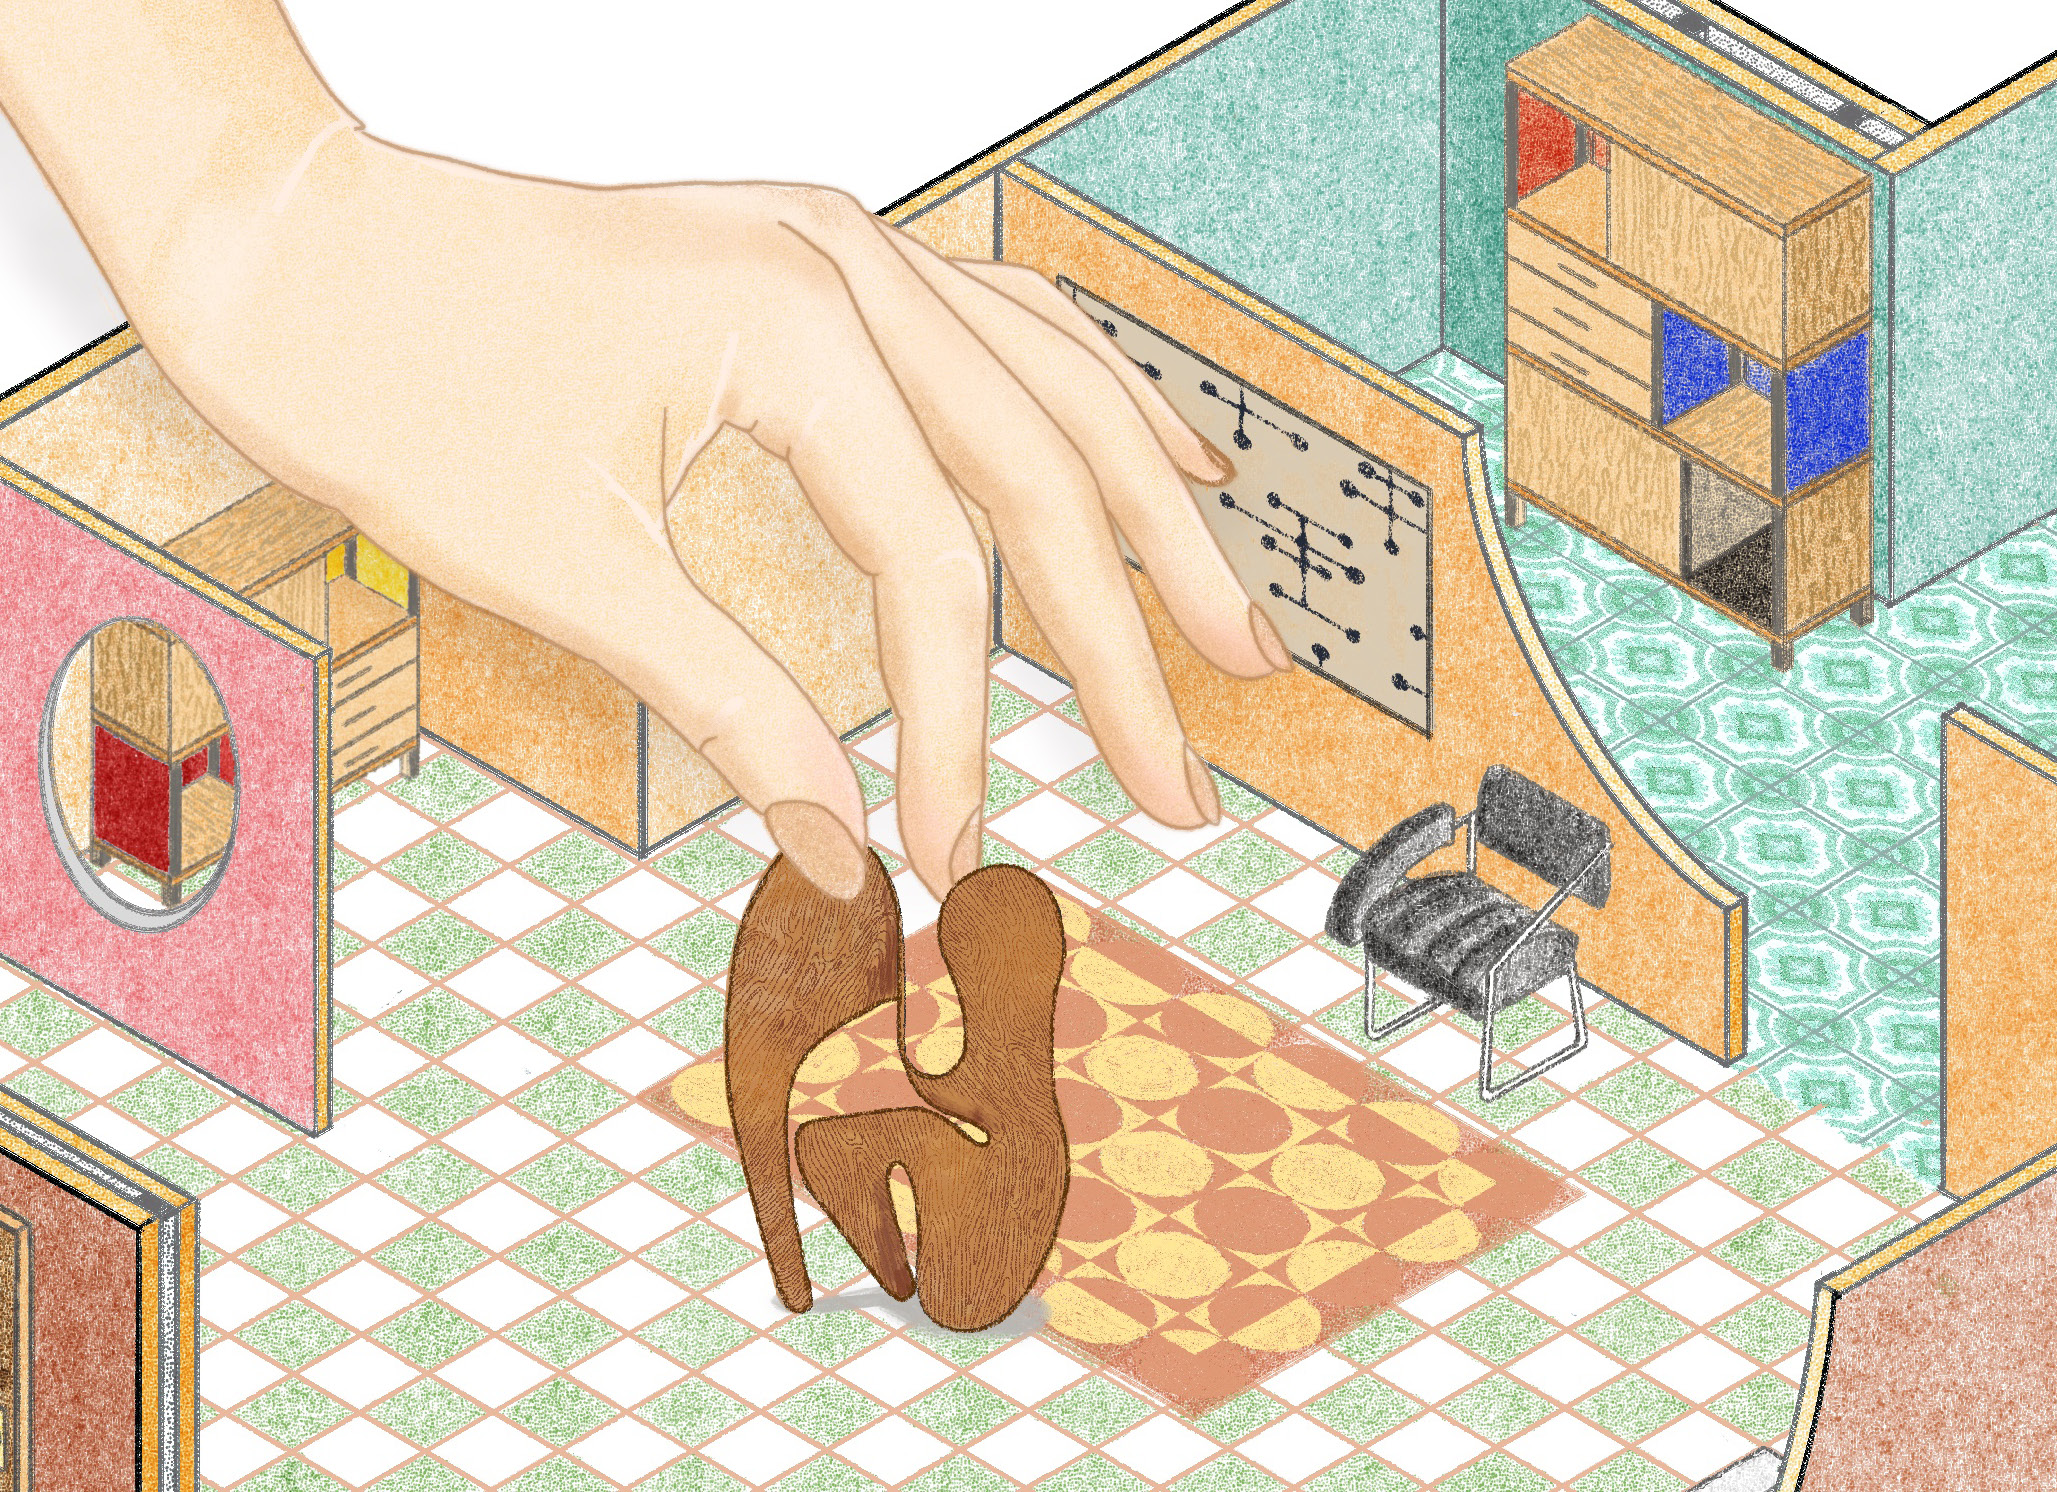 illustration of a hand placing a sculpure in a small room